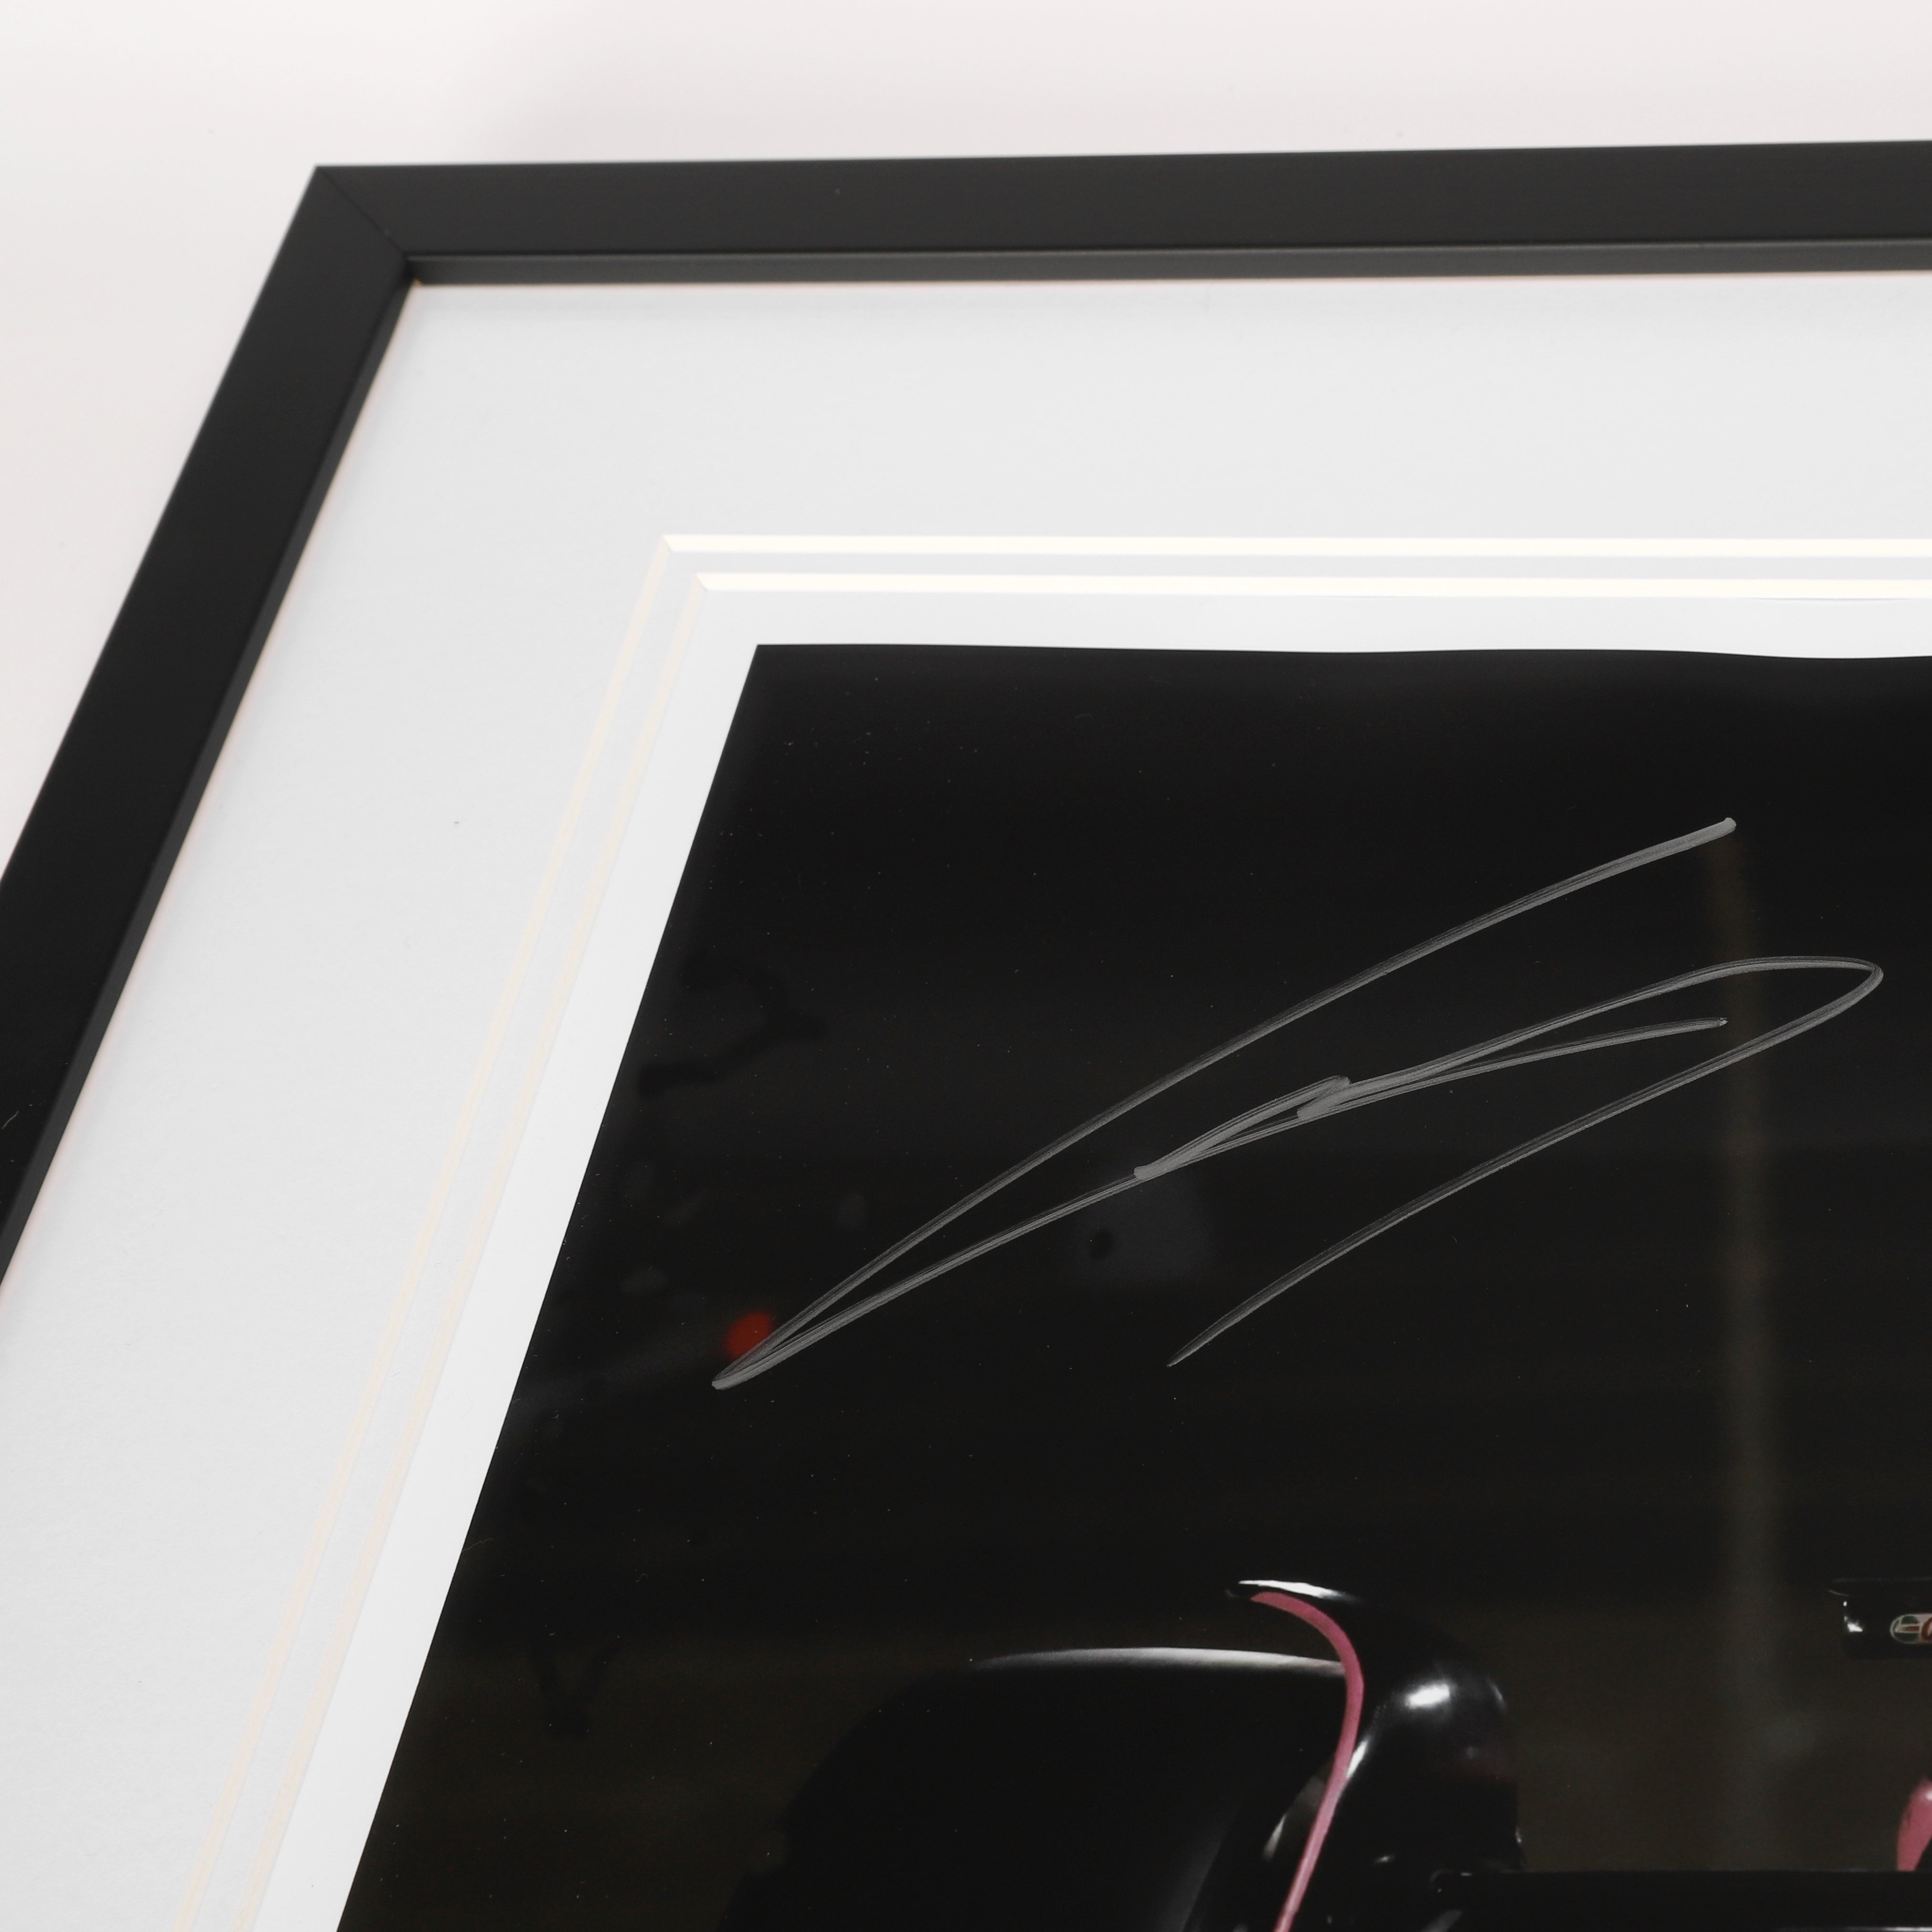 Pierre Gasly 2023 Signed Photo – Bahrain GP